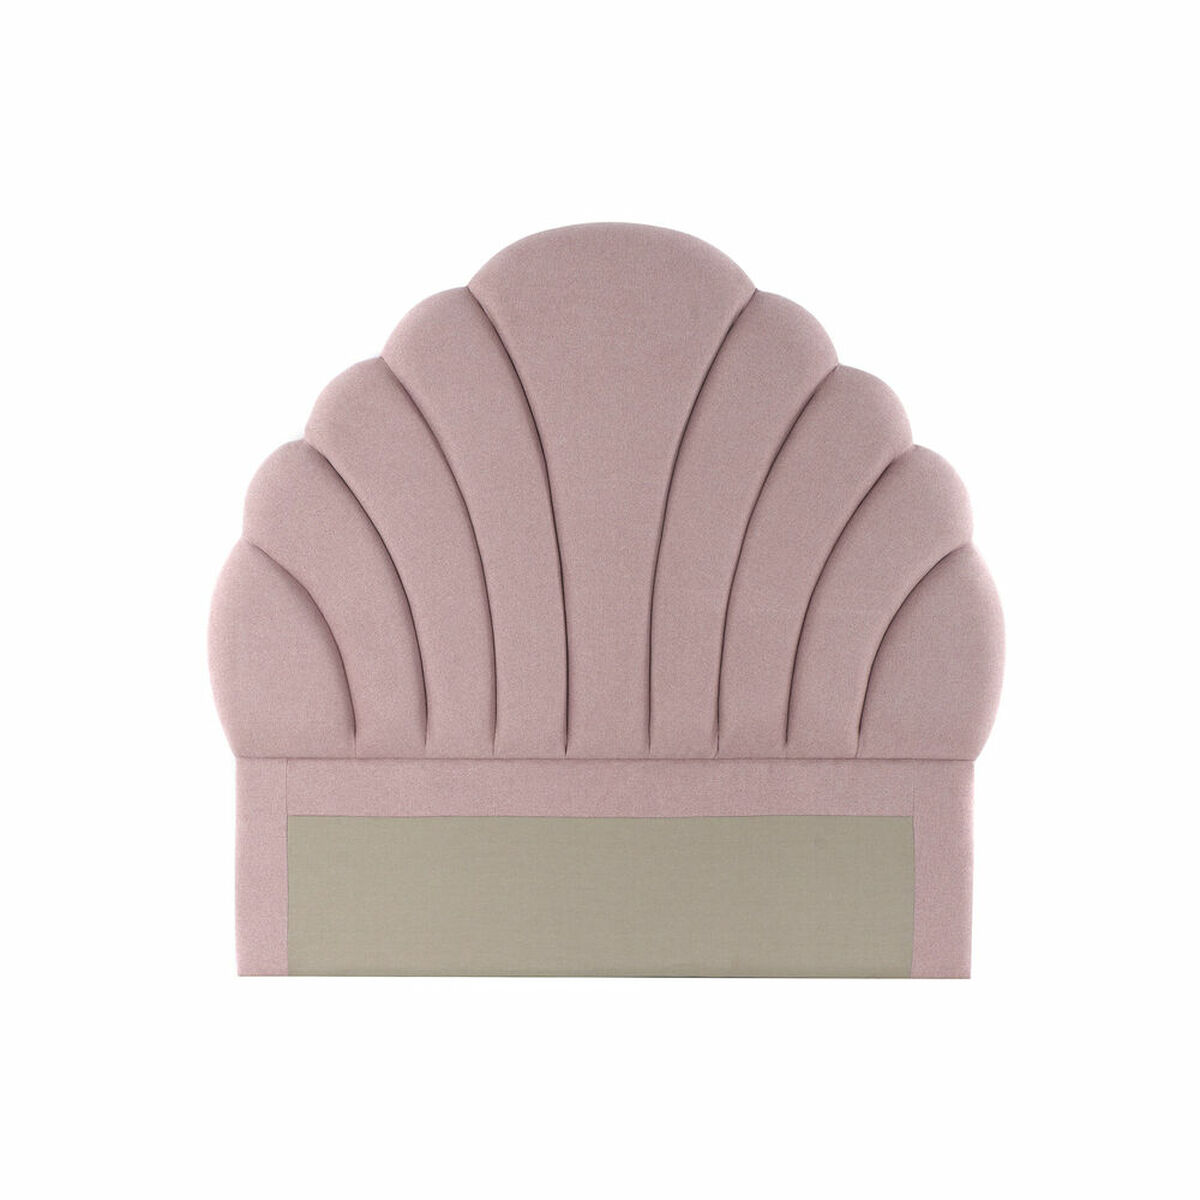 Headboard DKD Home Decor Pink Polyester MDF Wood